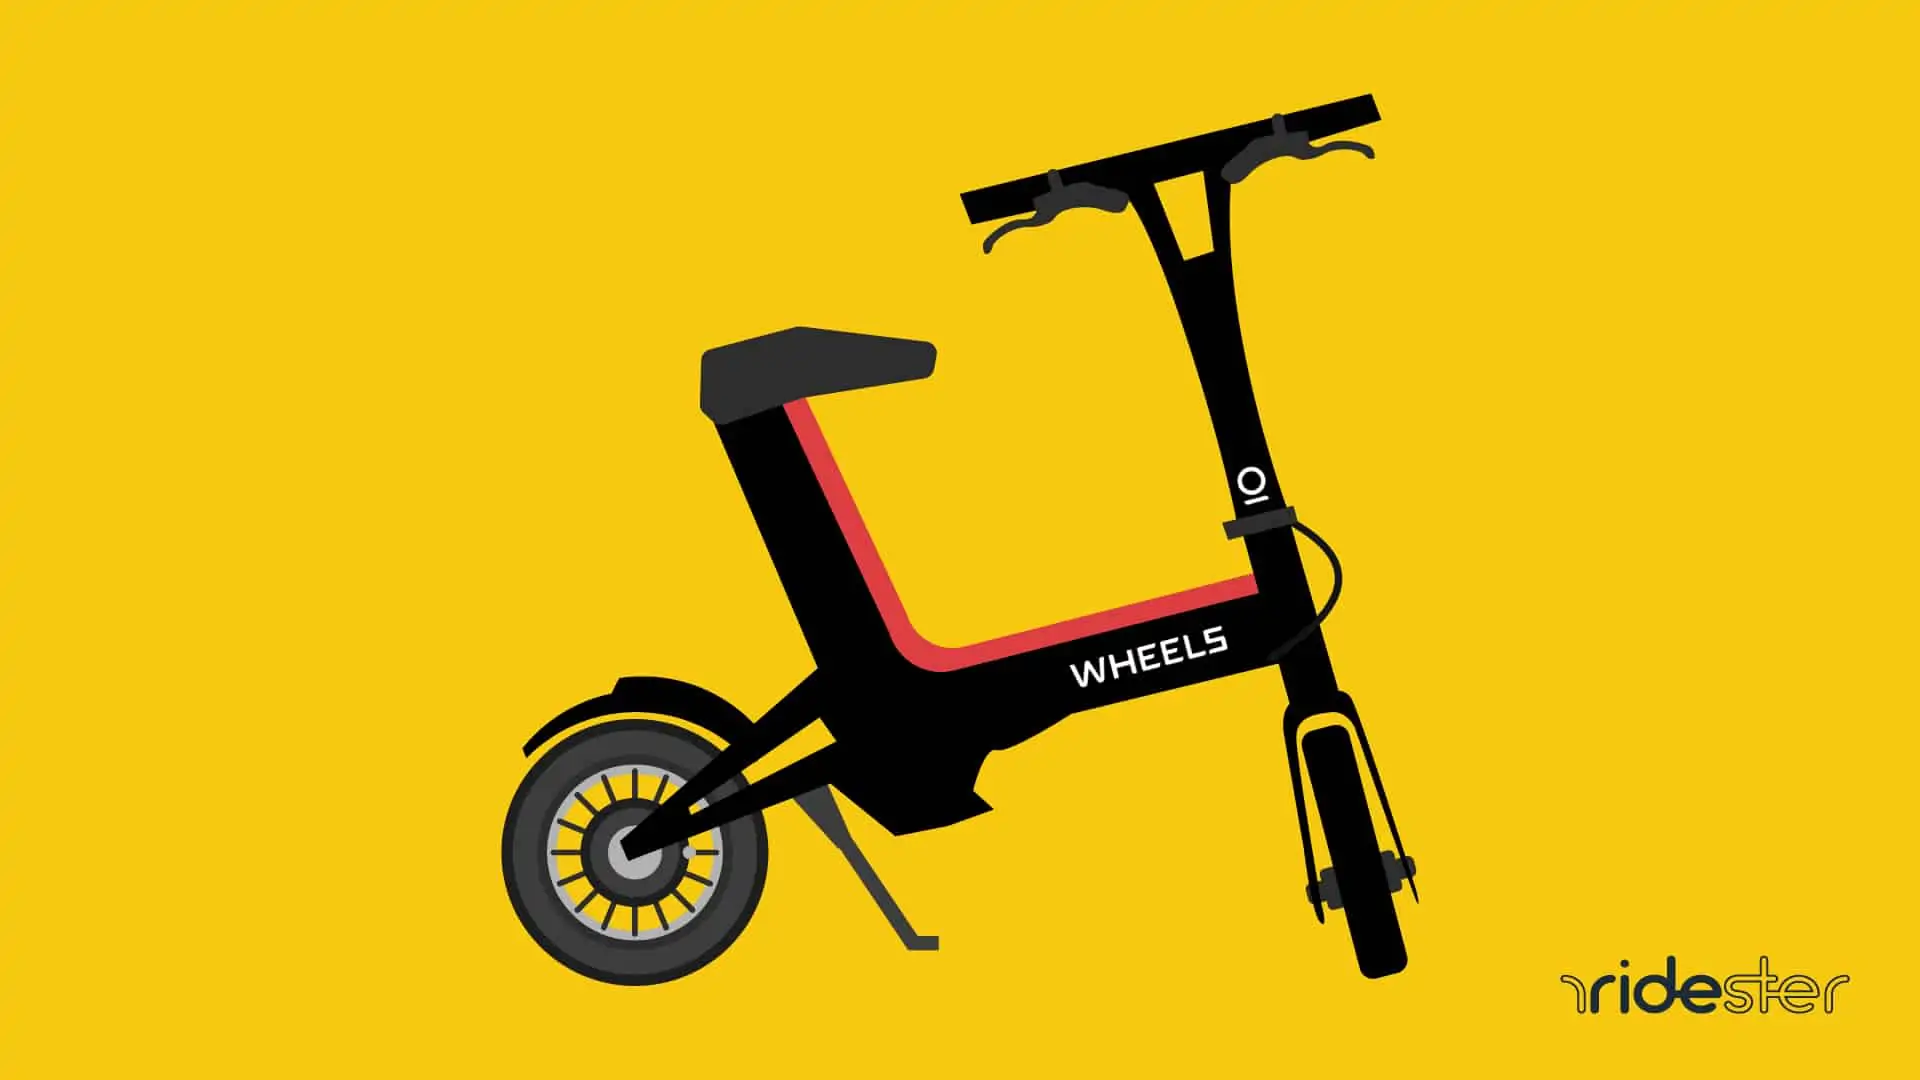 vector graphic showing a wheels electric bike on a sidewalk